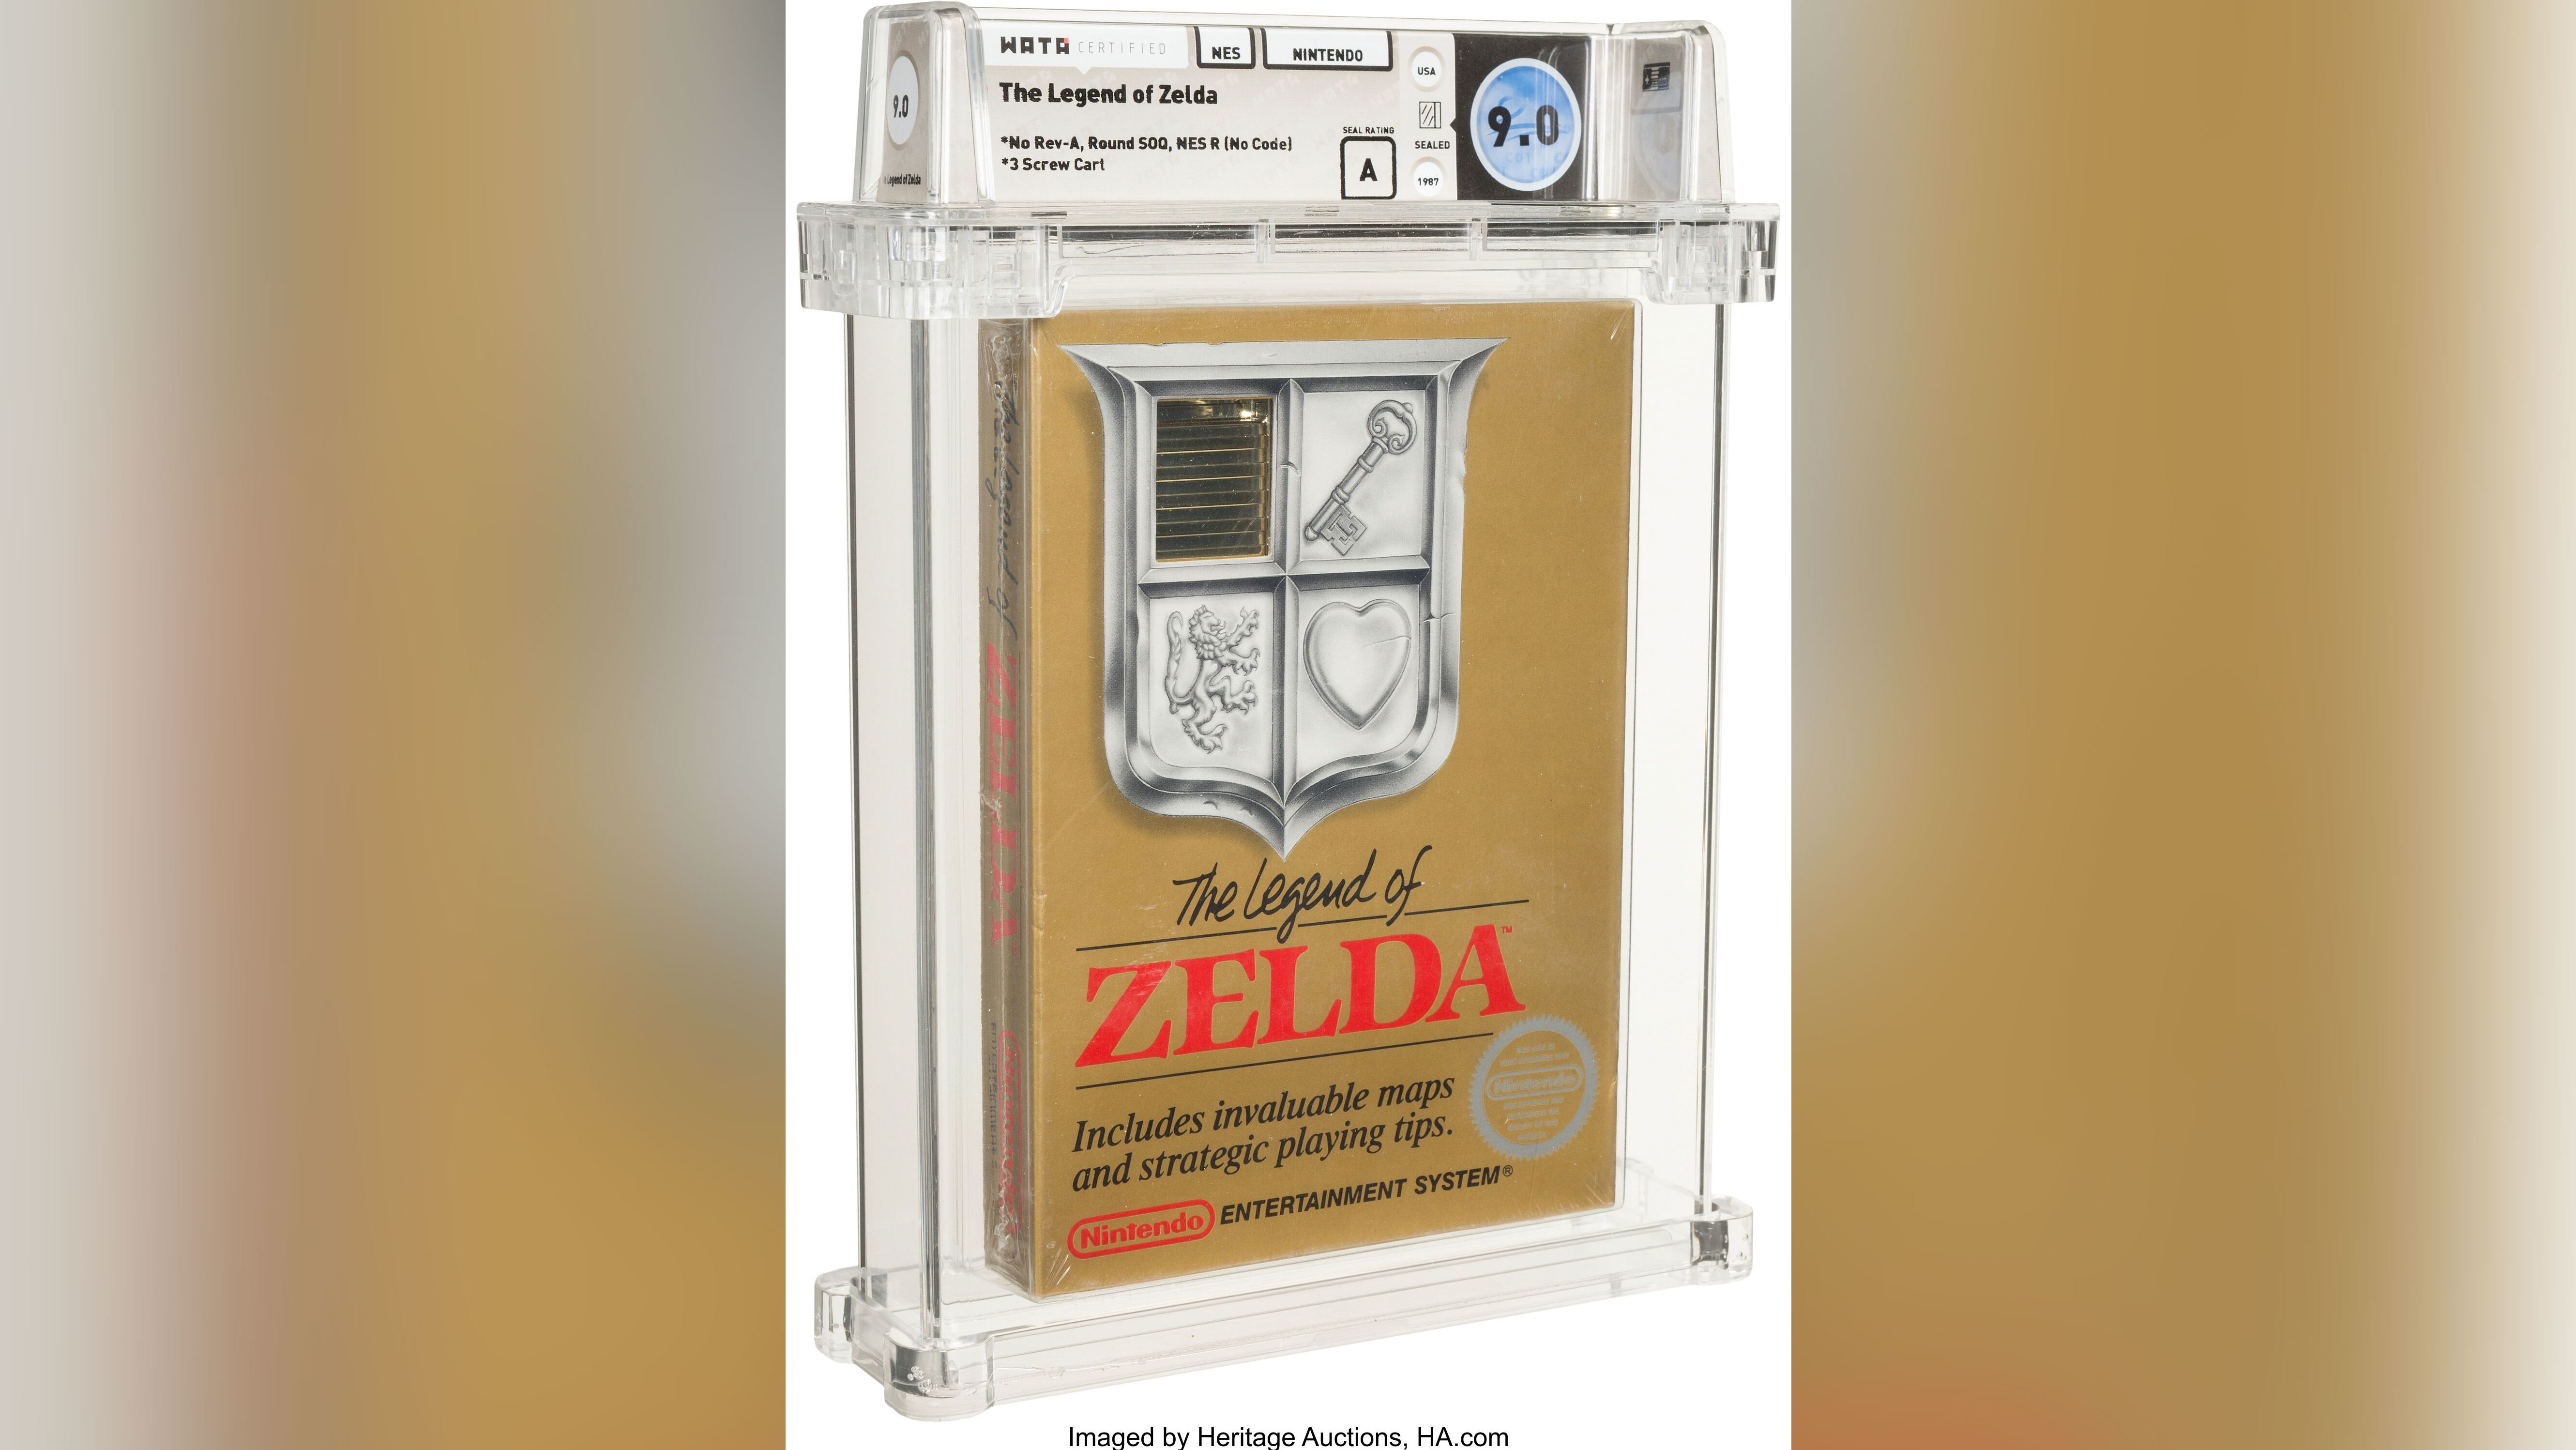 This sealed version of The Legend of Zelda sold for $870,000 on Friday.